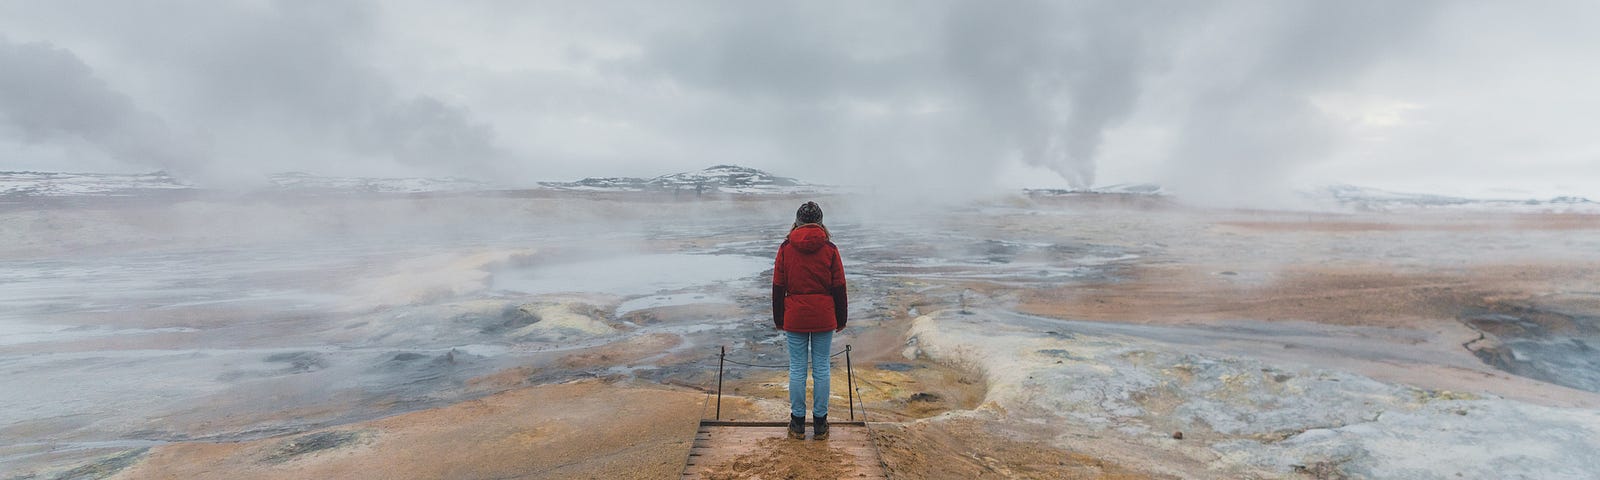 A photo of a person standing, back to the camera, in a desolate landscape. It is gloomy and looks cold.